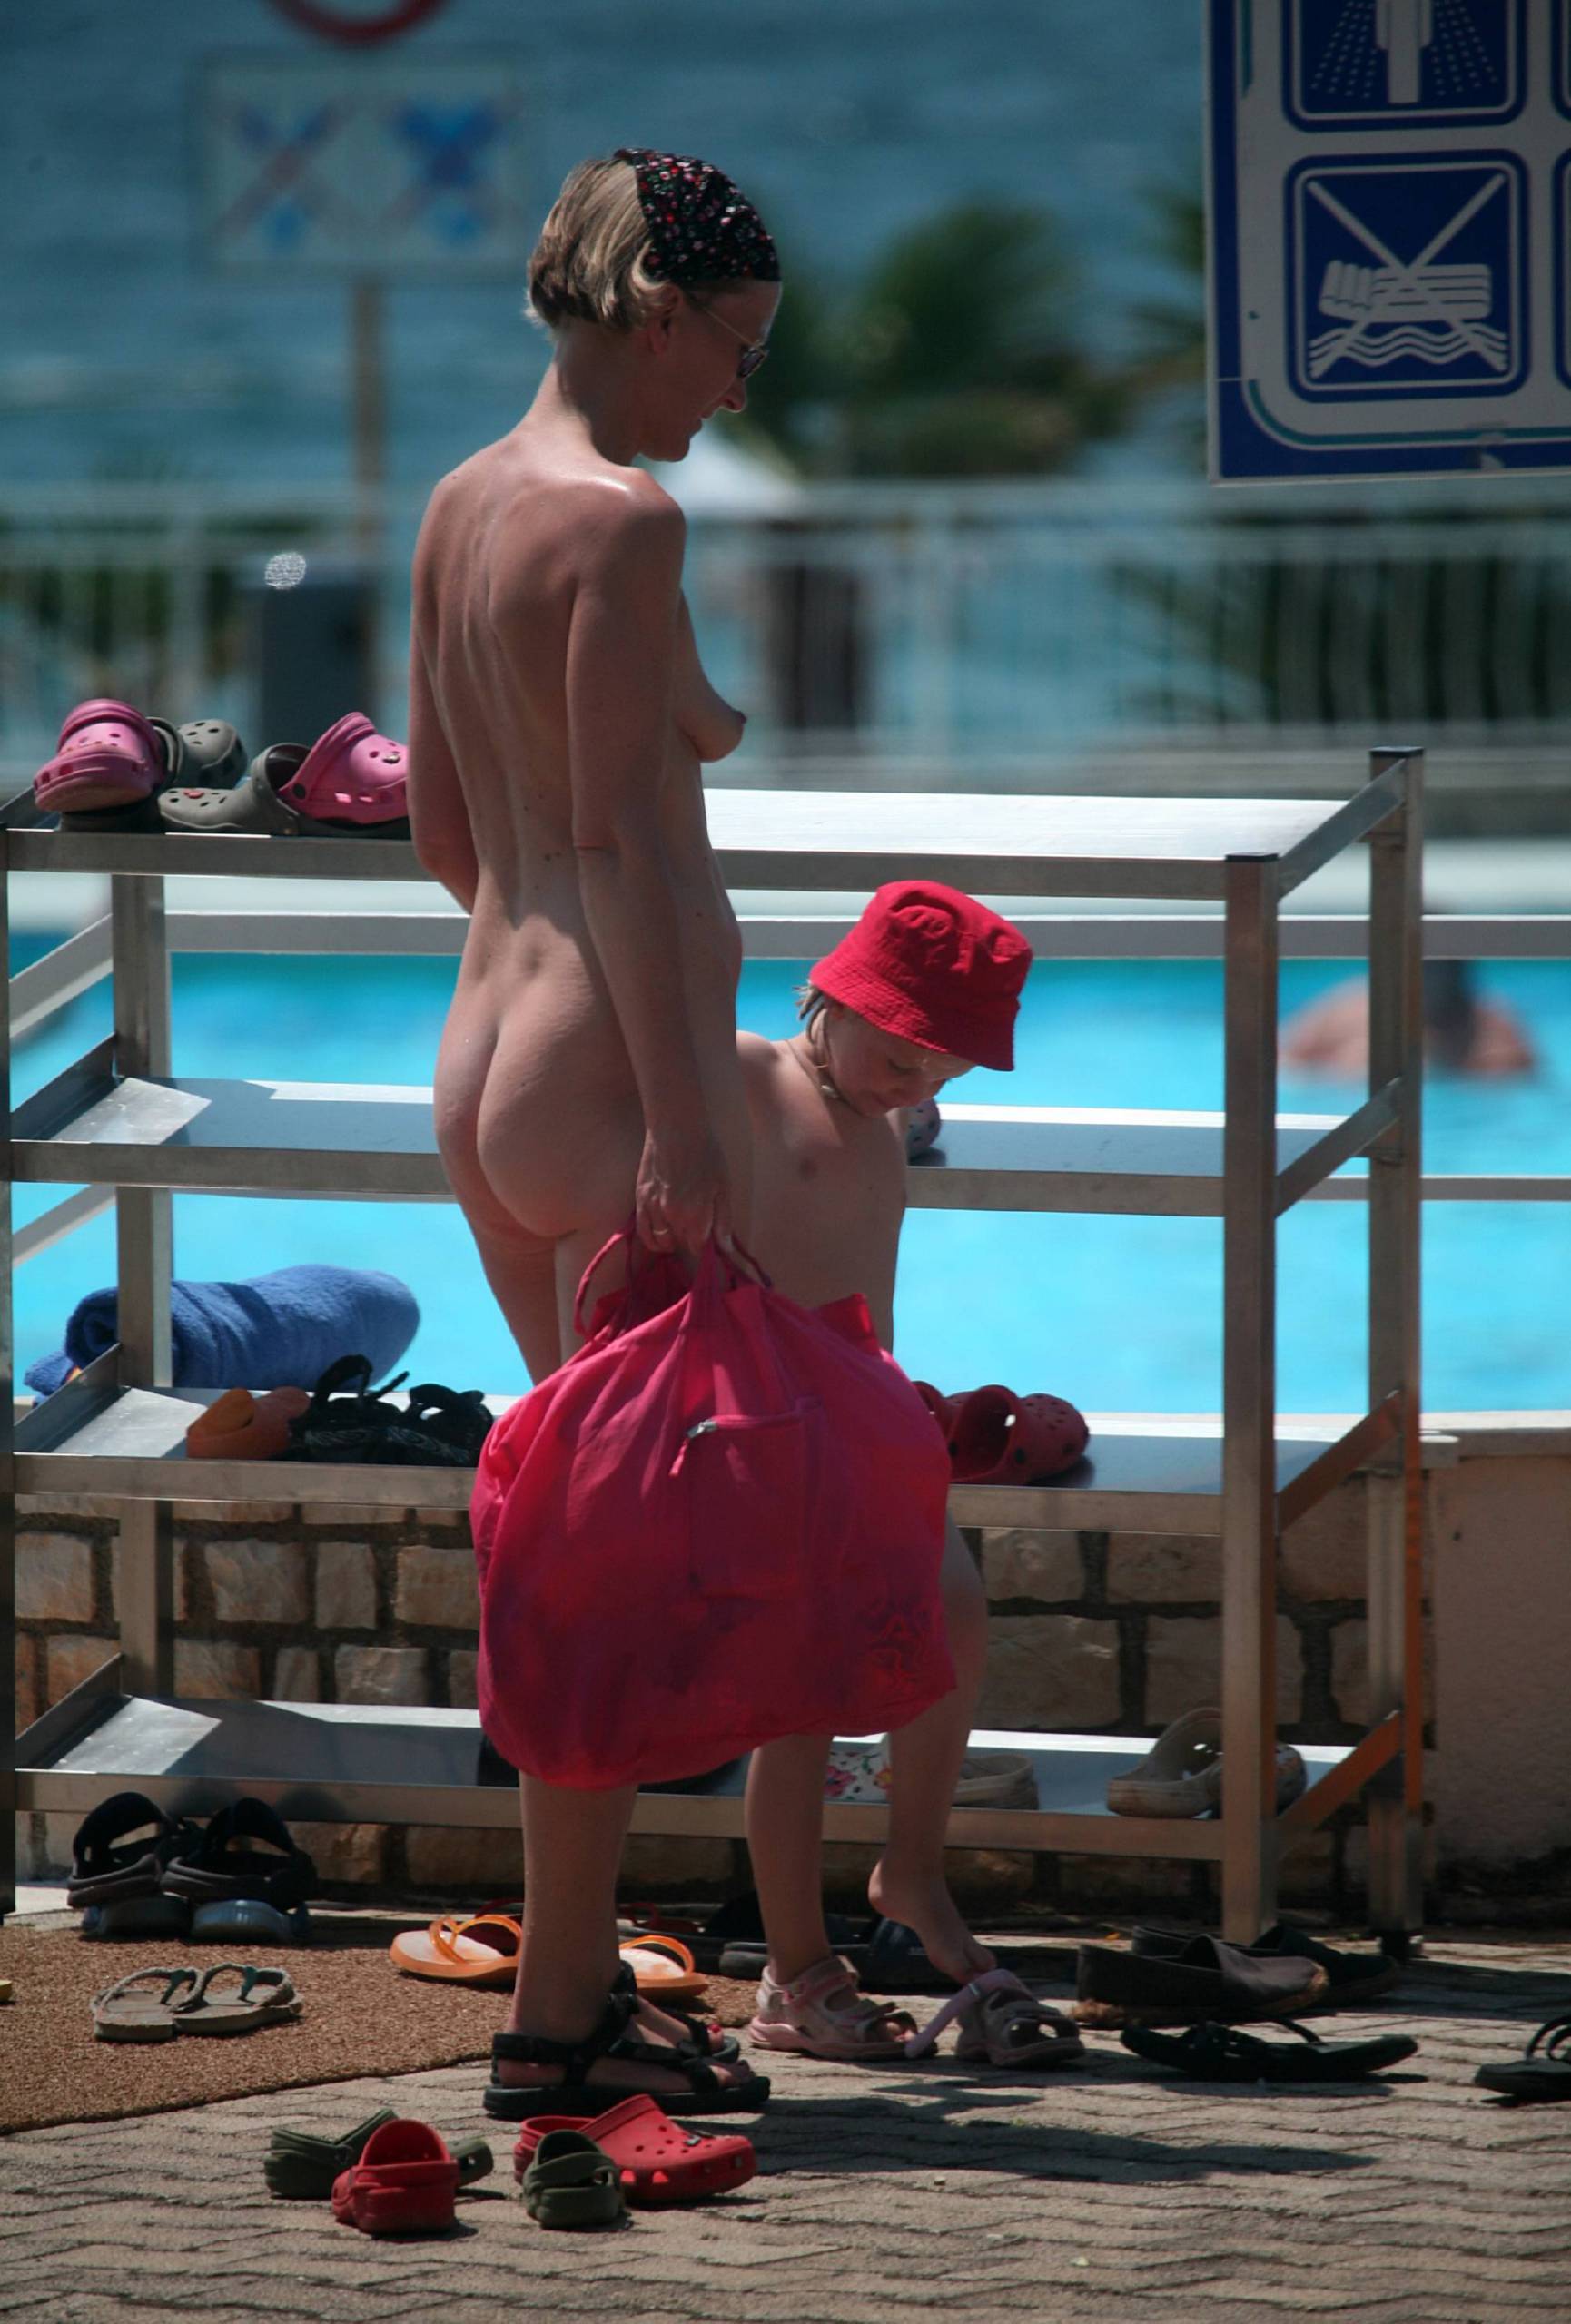 Naturist Mother and Child - 1